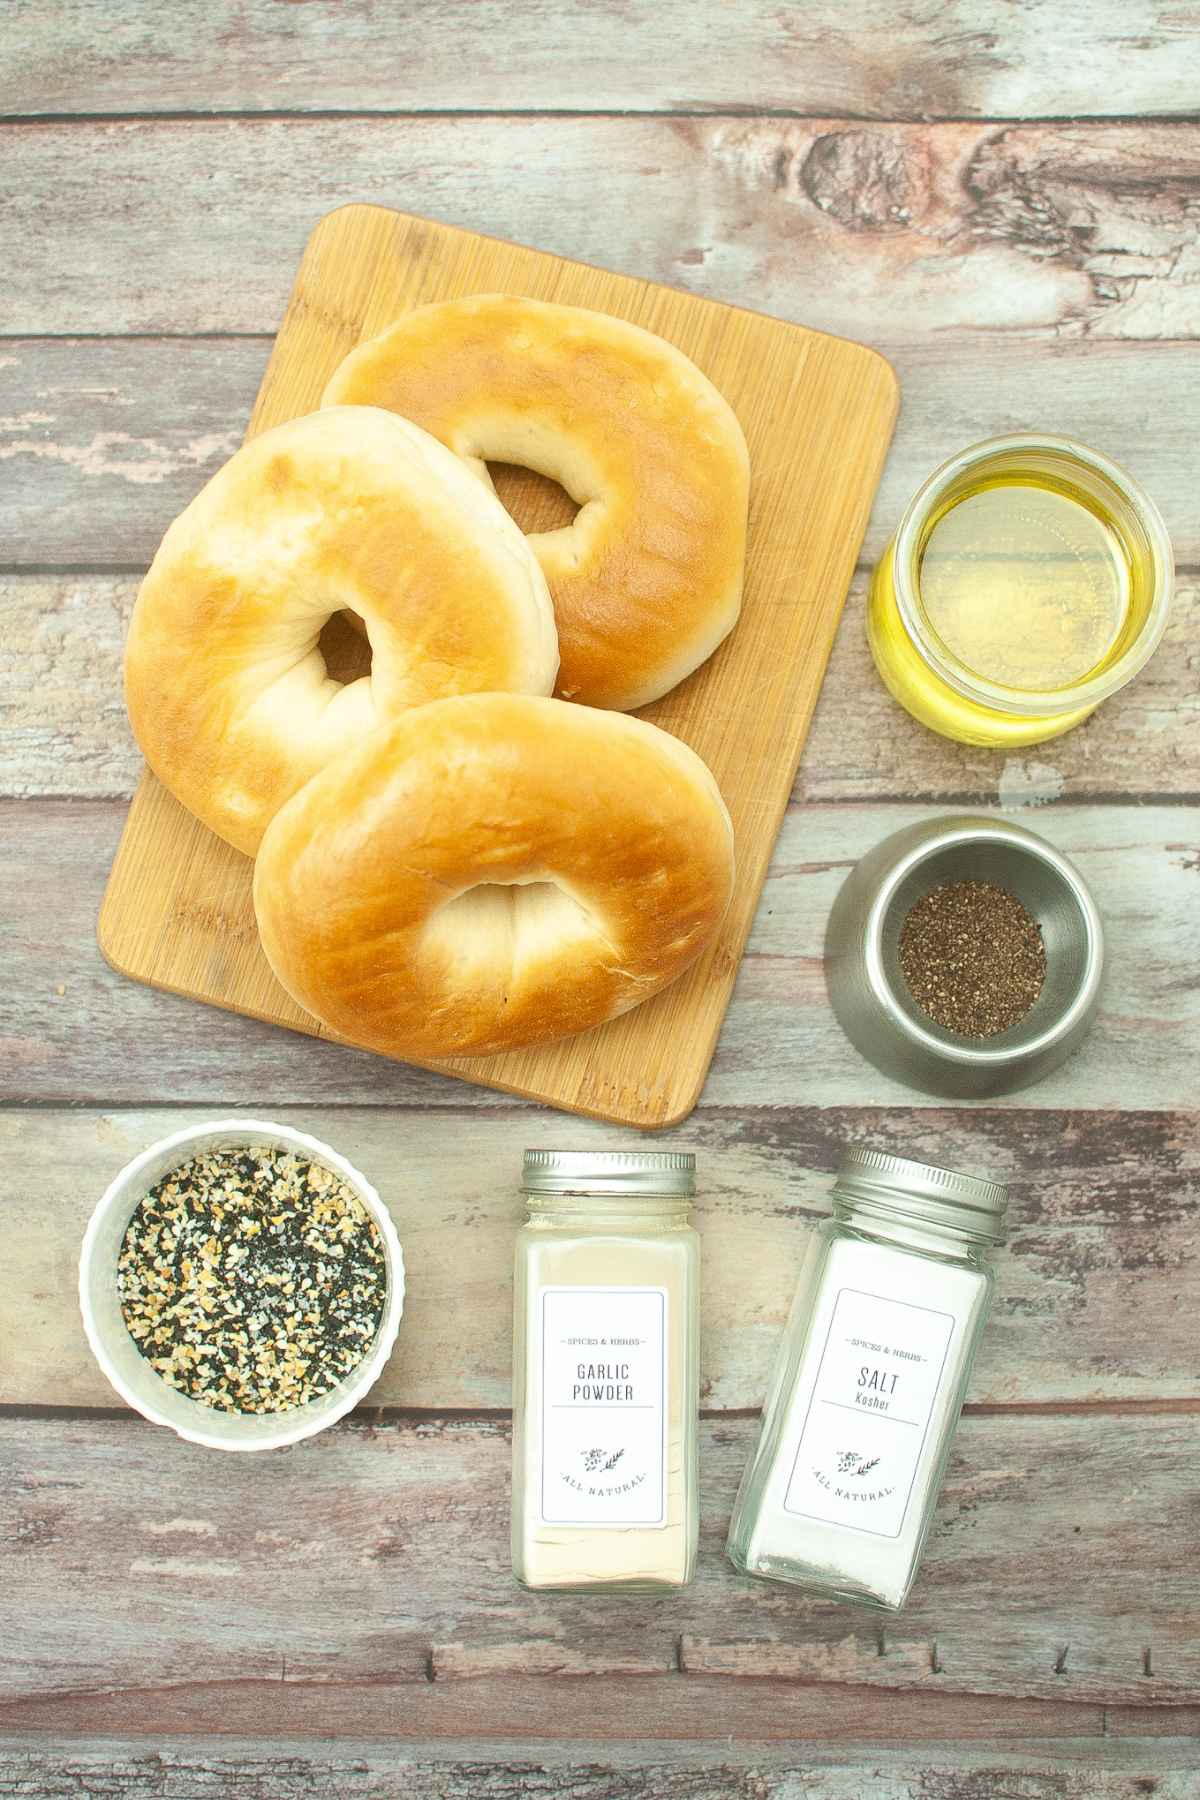 Three bagels on a cutting board with a jar of olive oil, black pepper, garlic powder, and everything seasoning.